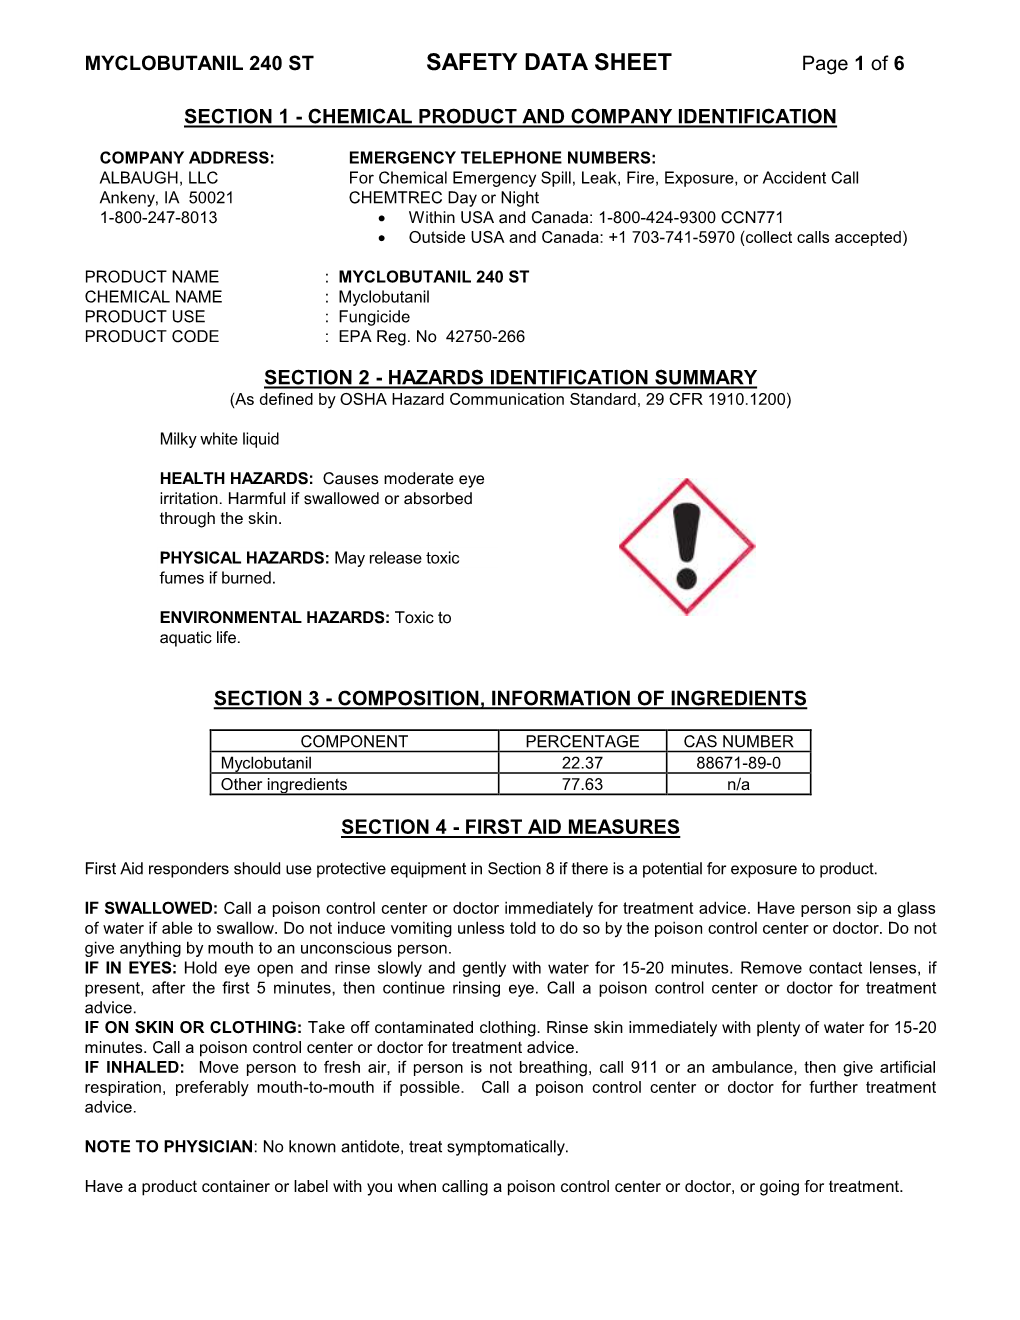 SAFETY DATA SHEET Page 1 of 6